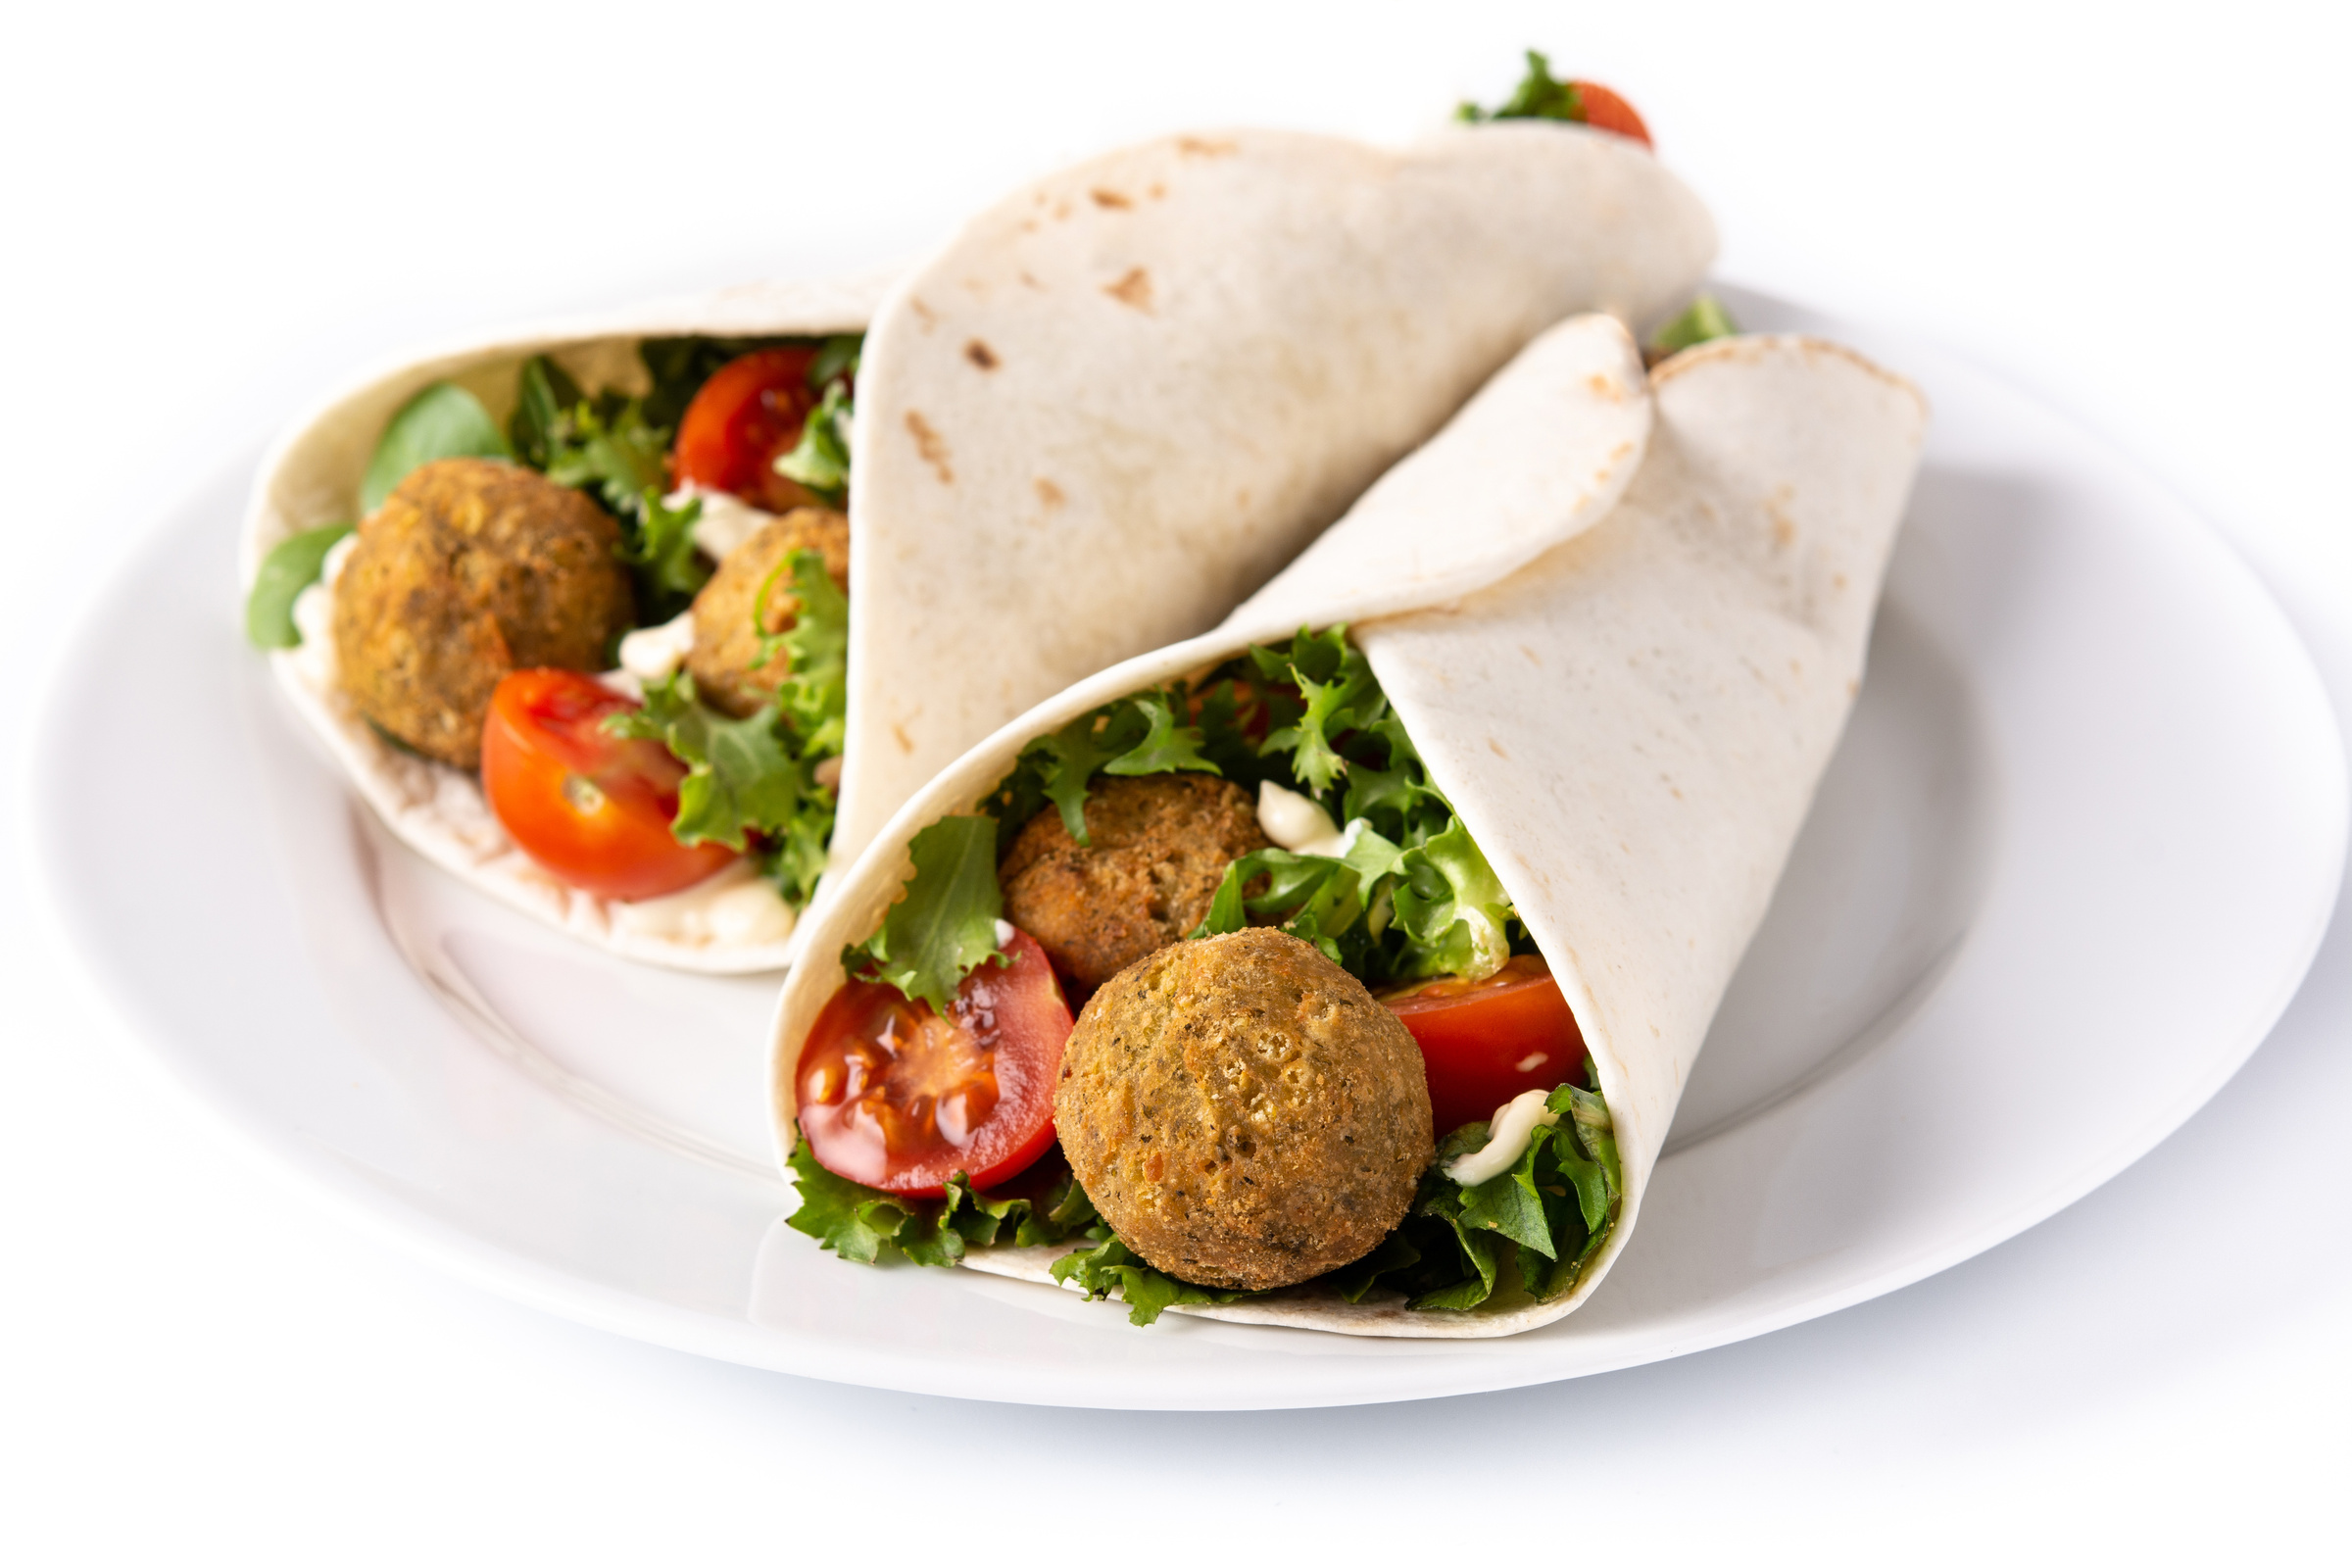 Tortilla Wrap with Falafel and Vegetables